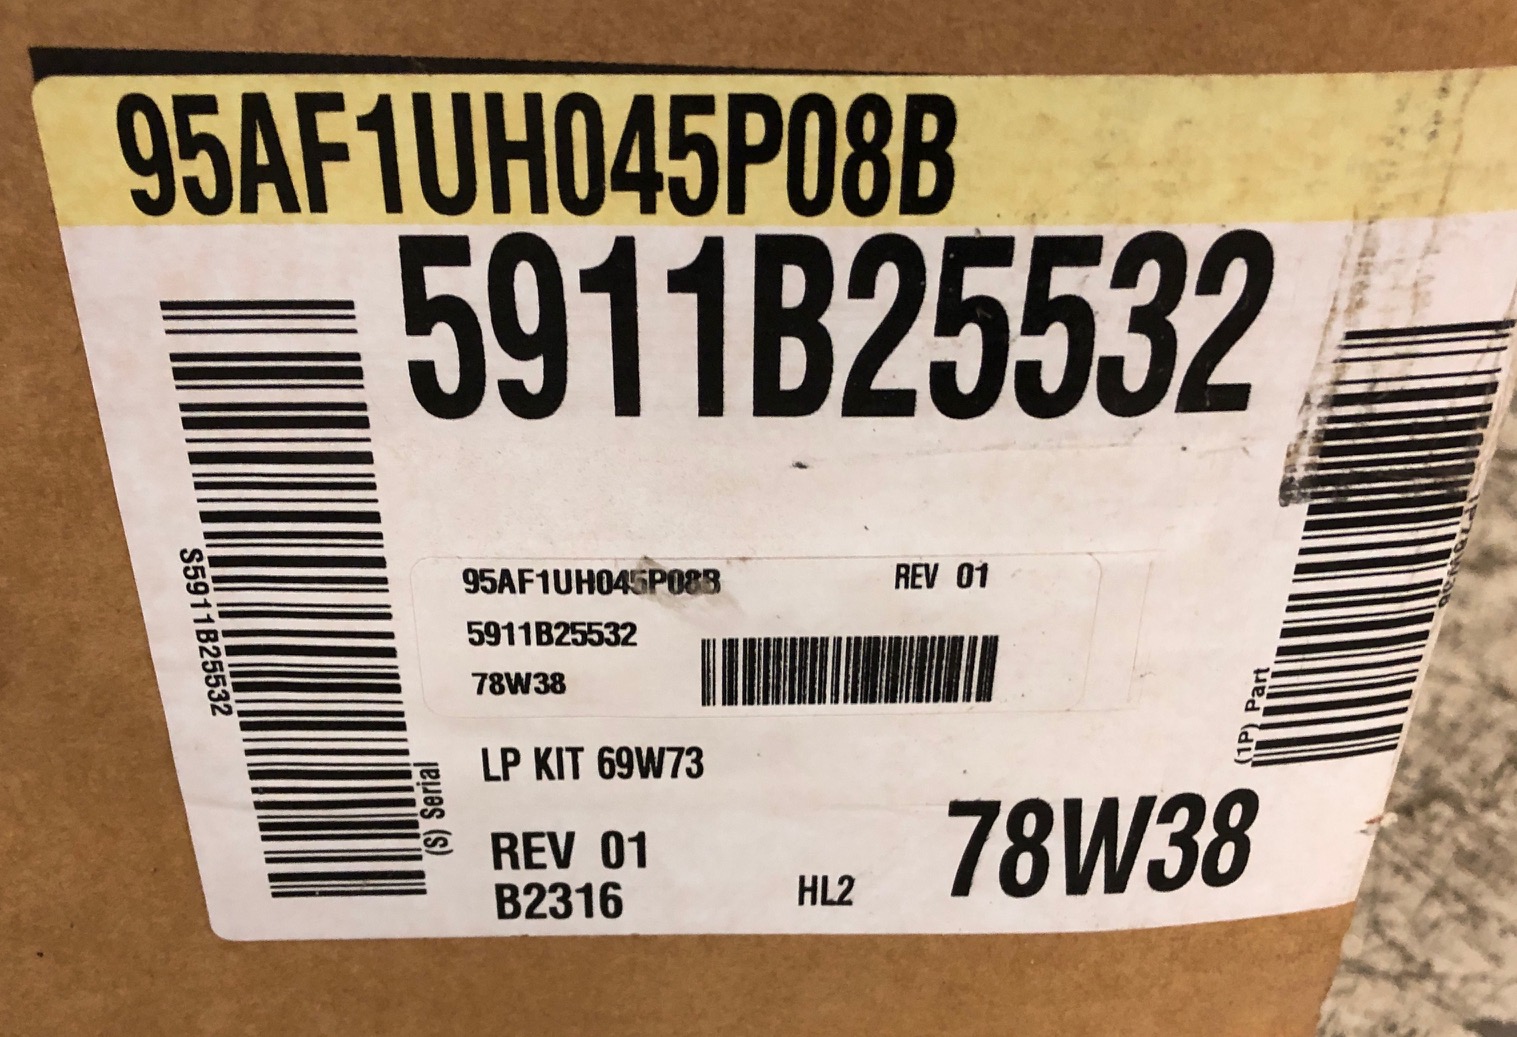 aire-flo serial number